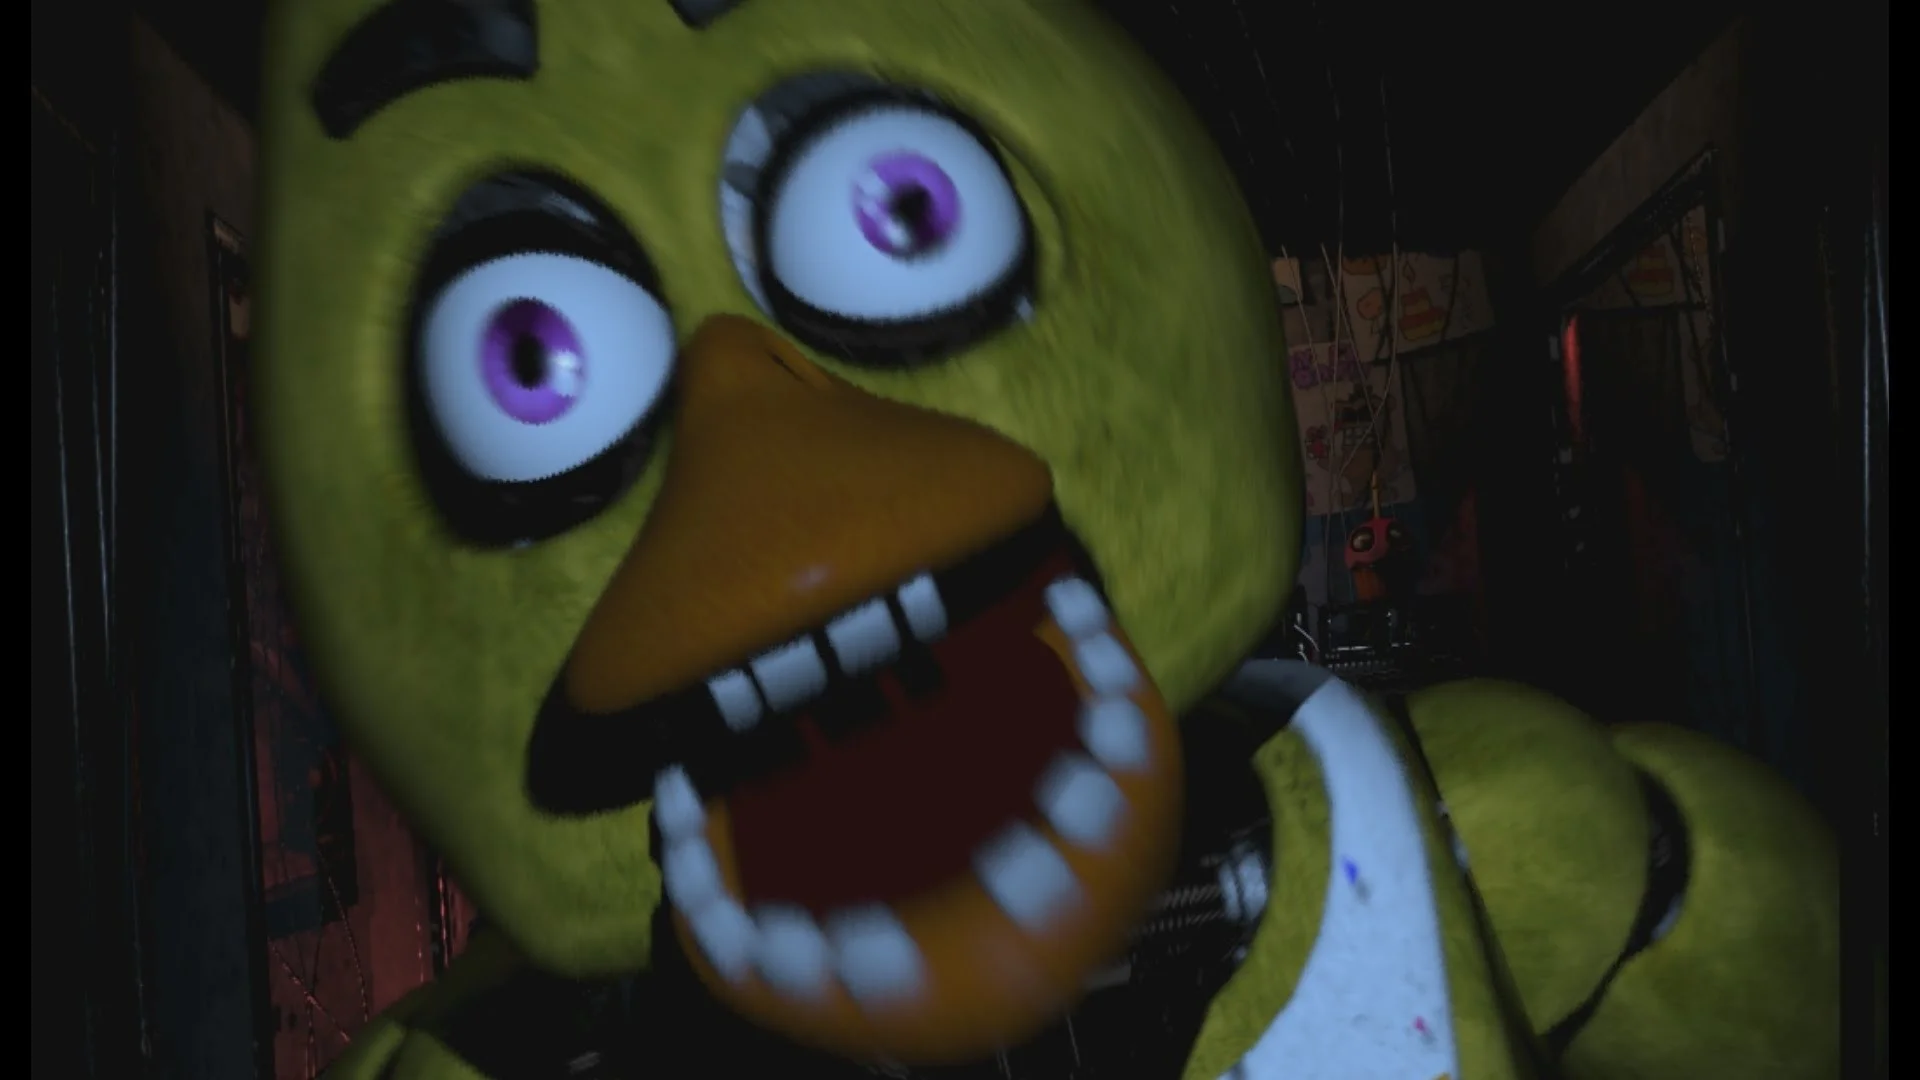 WORST JUMPSCARE IVE EVER HAD – Five Nights at Freddys – Part